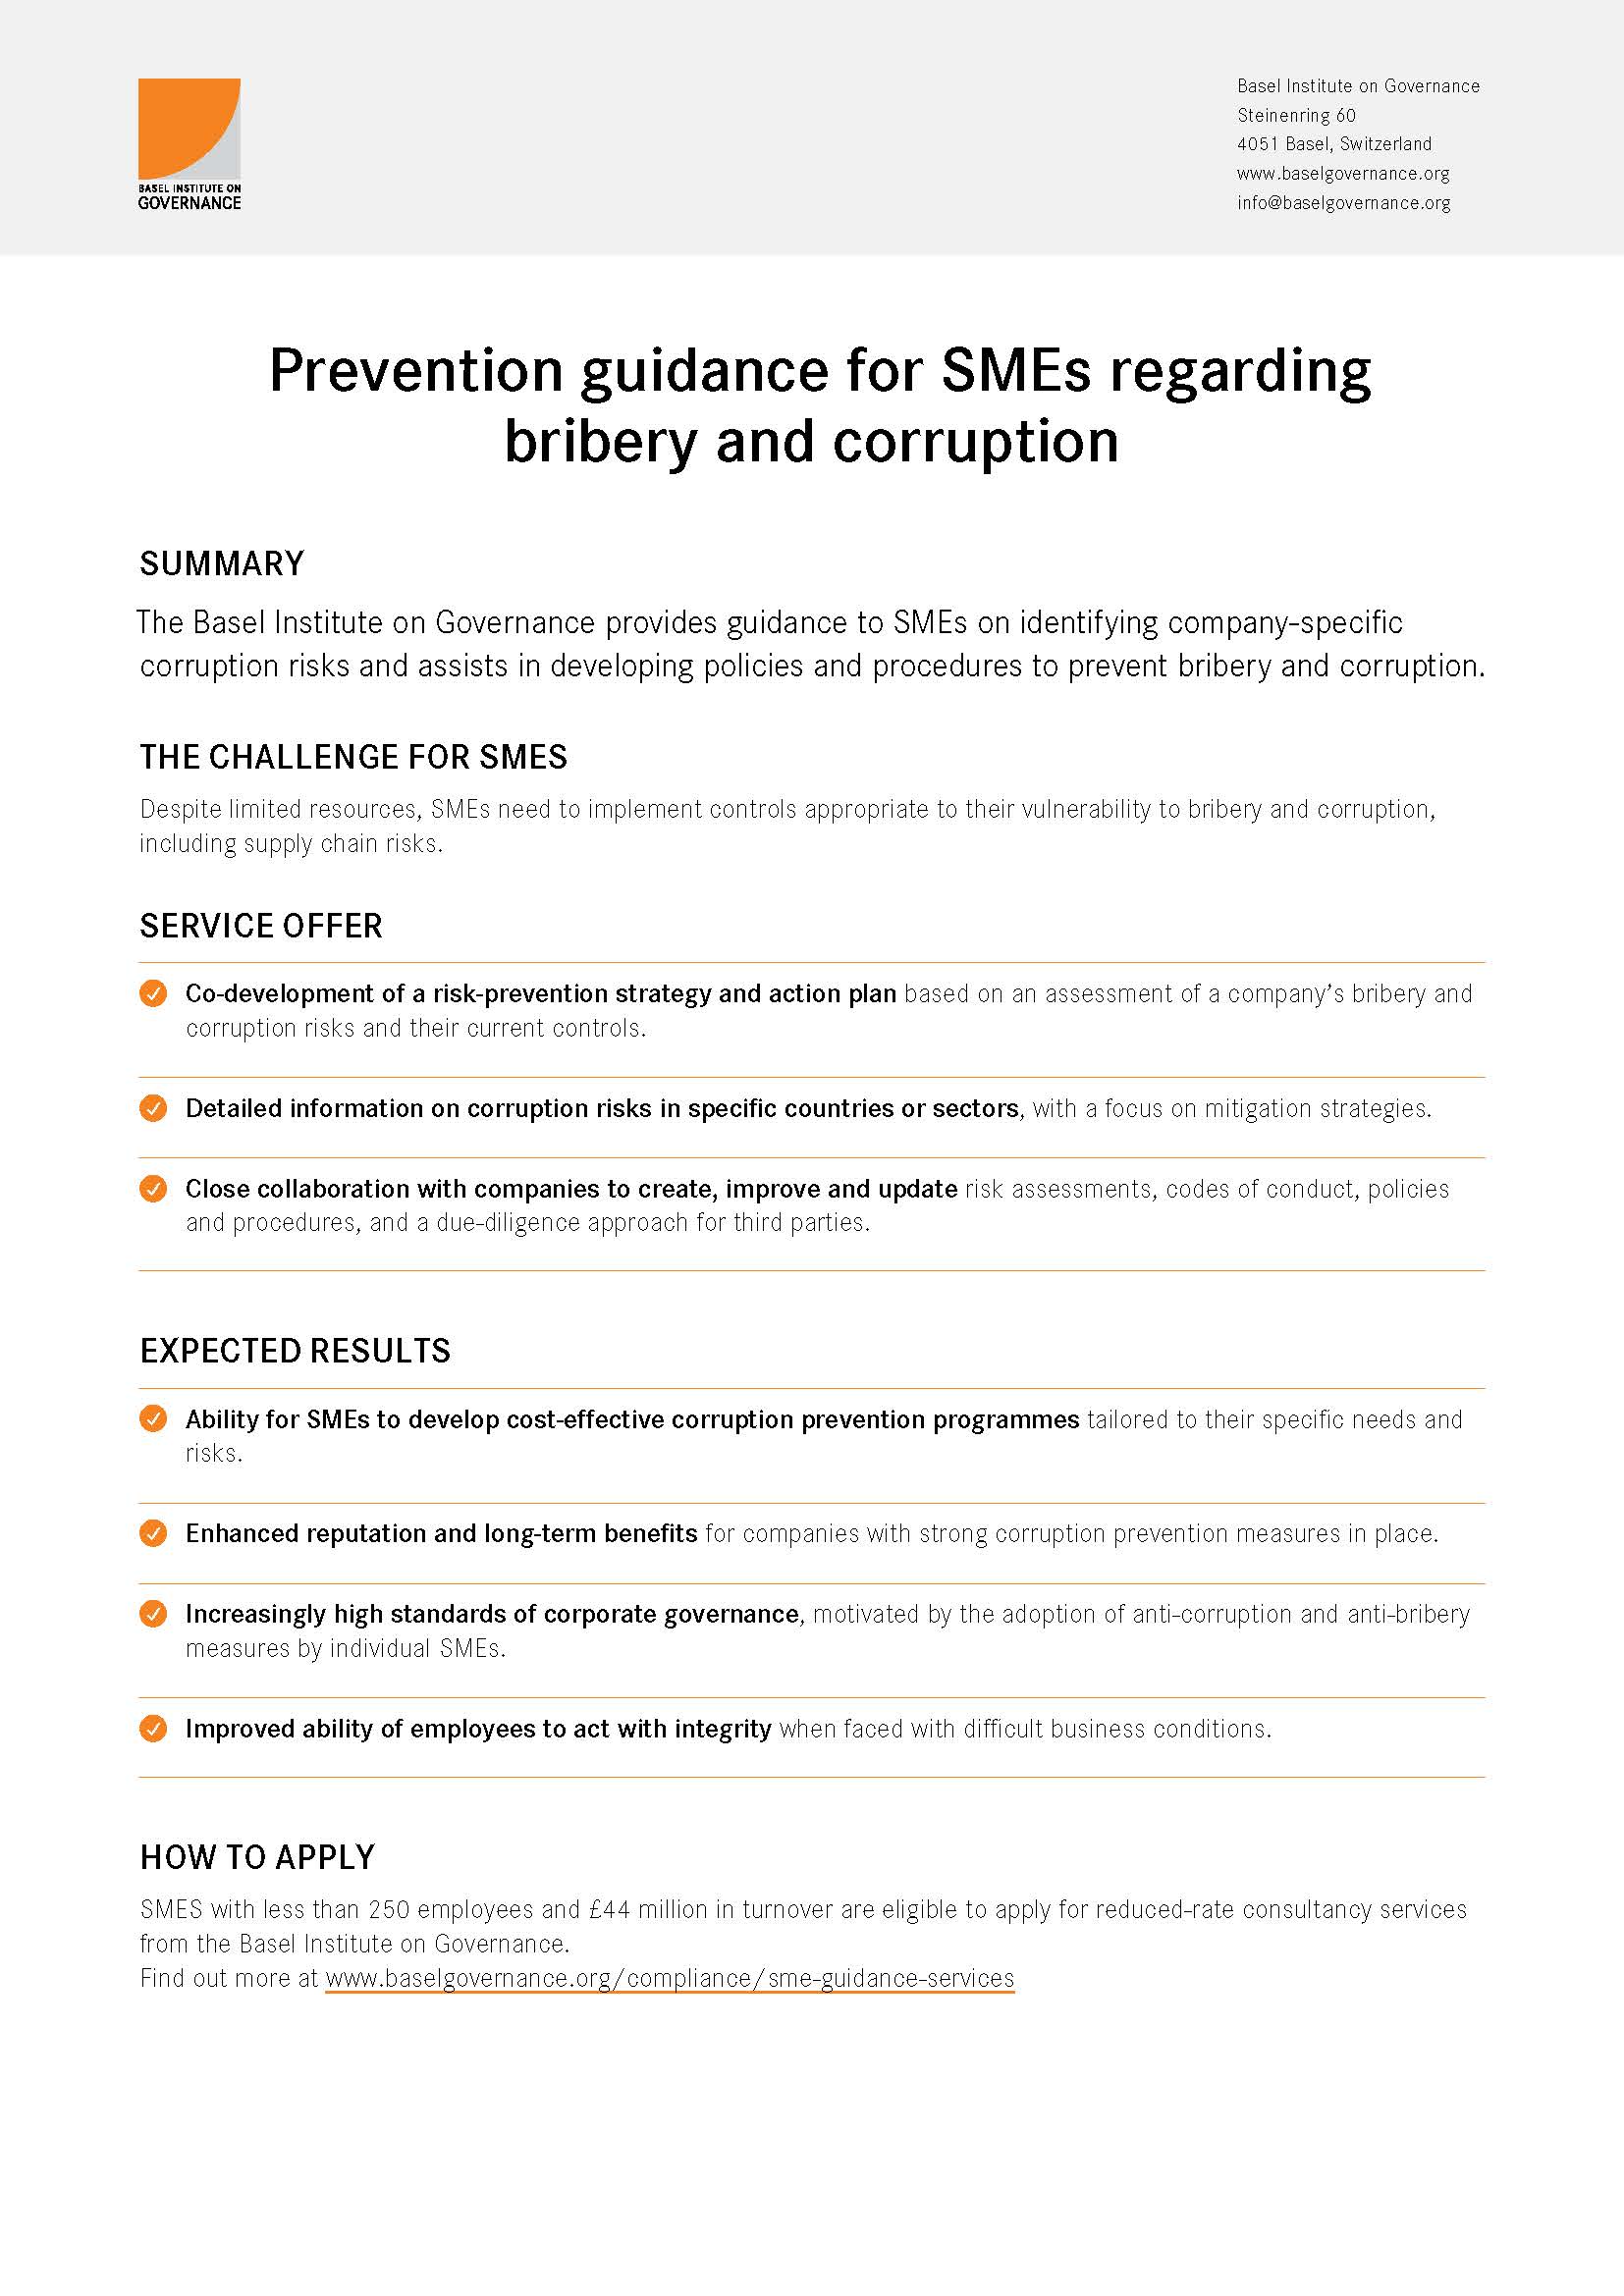 Prevention guidance for SMEs flyer